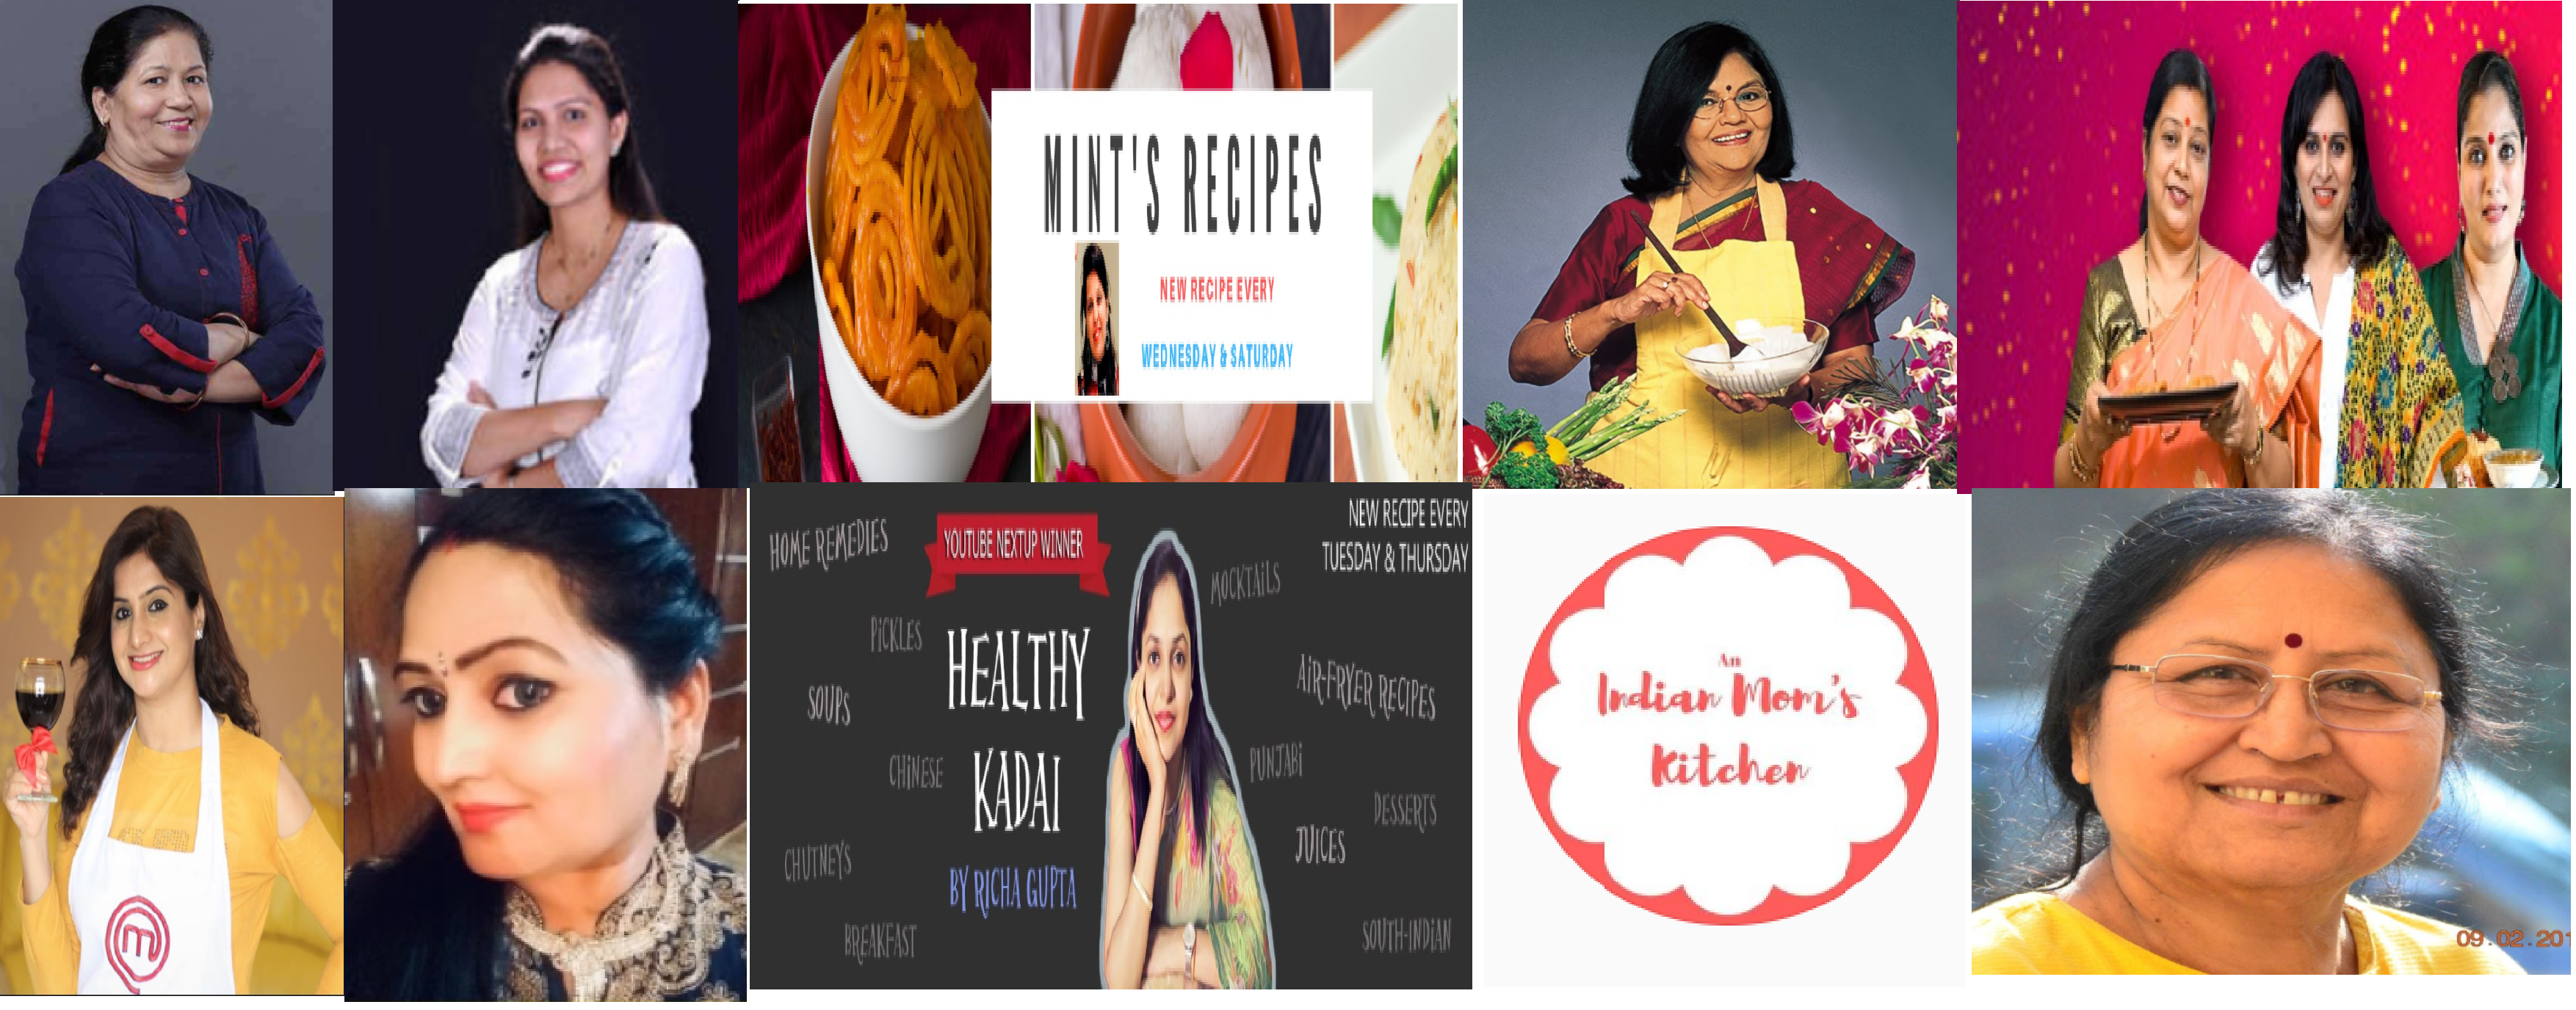 Top 10 Cooking Channels on YouTube Hosted by Indian Women The Indian Wire